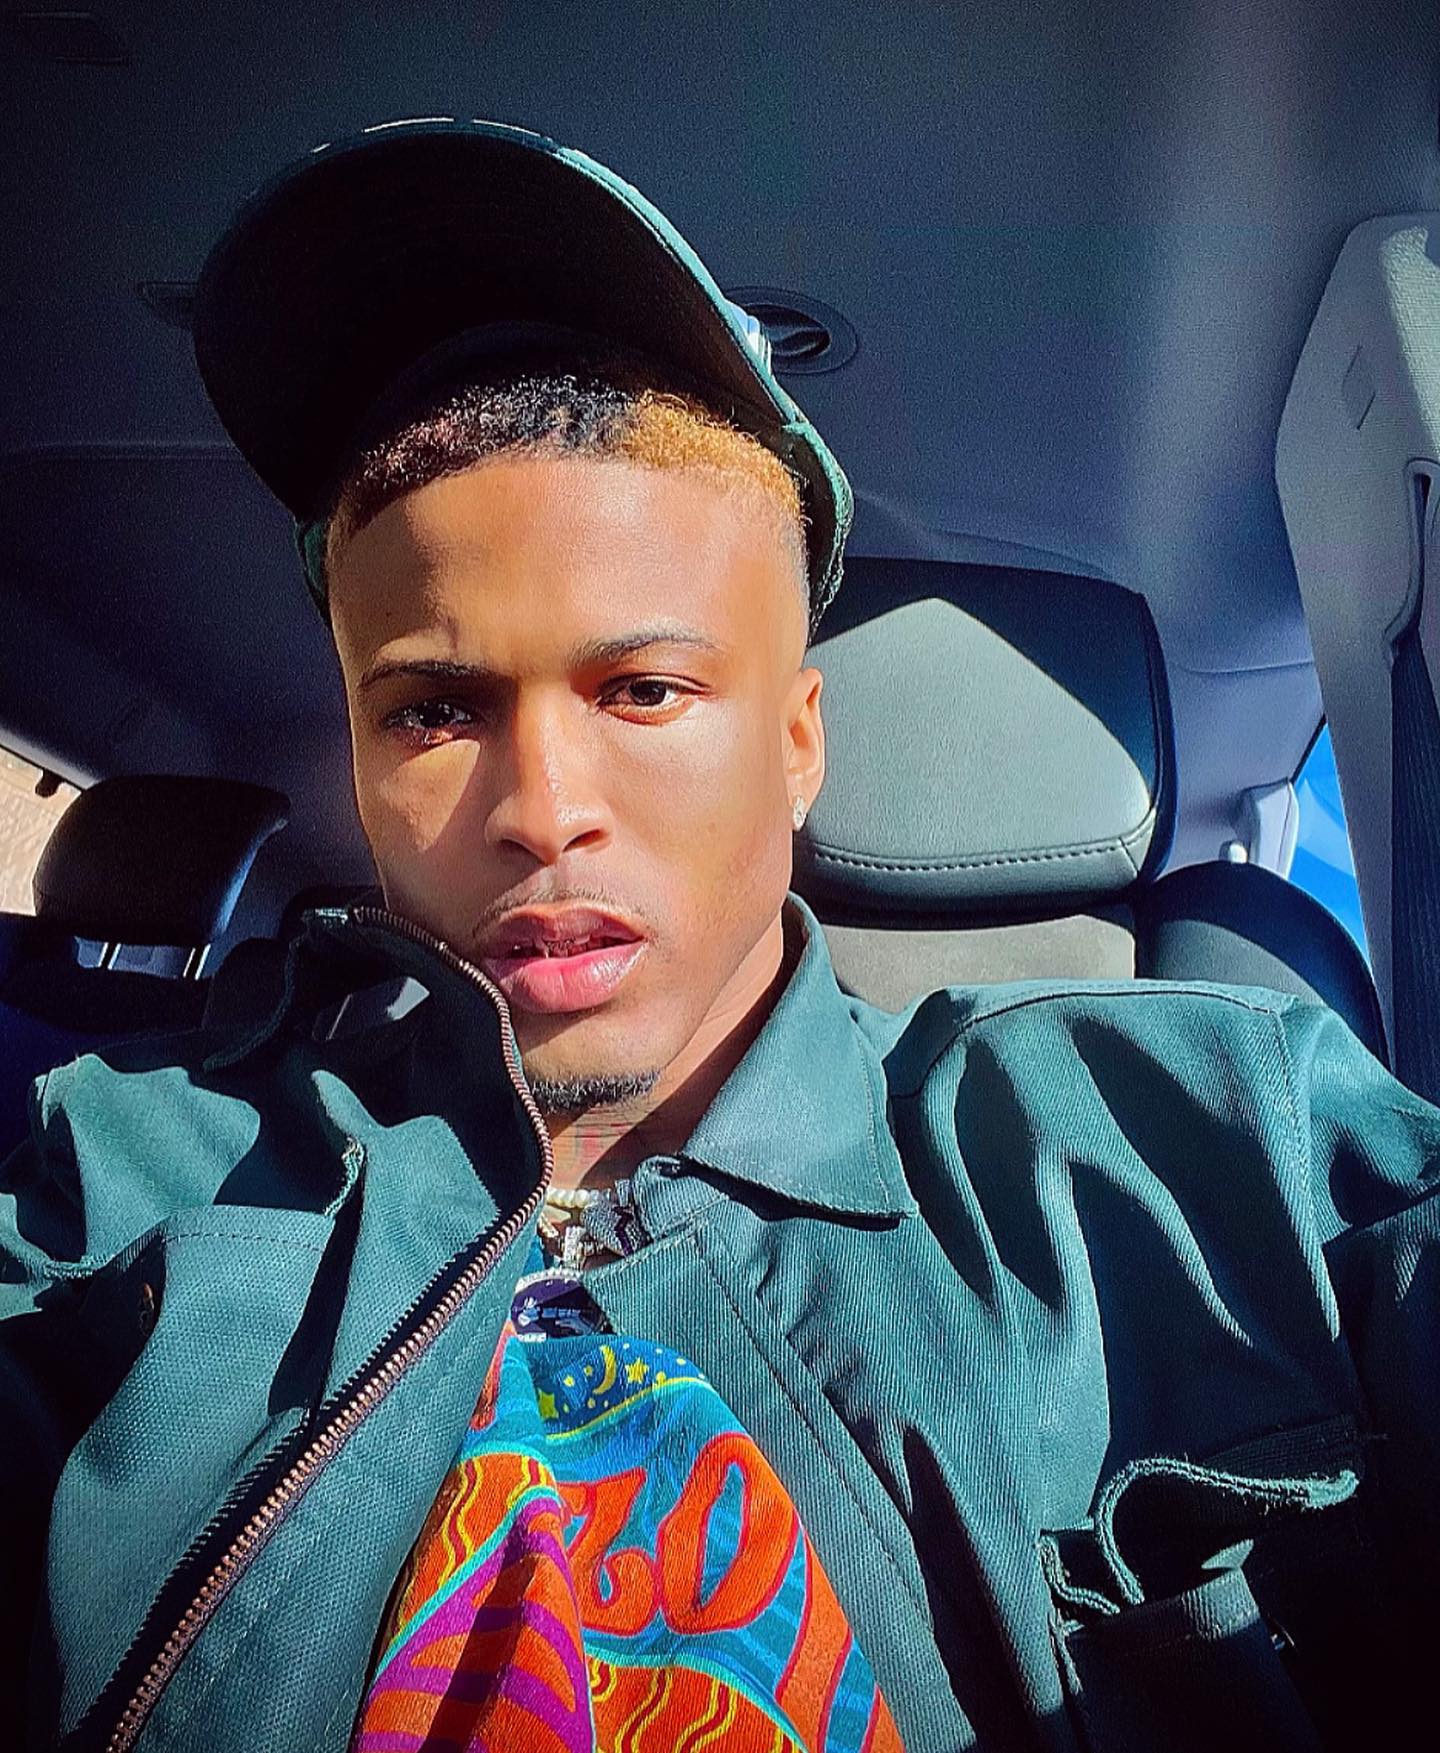 August Alsina age, height, net worth, Instagram, songs and other details